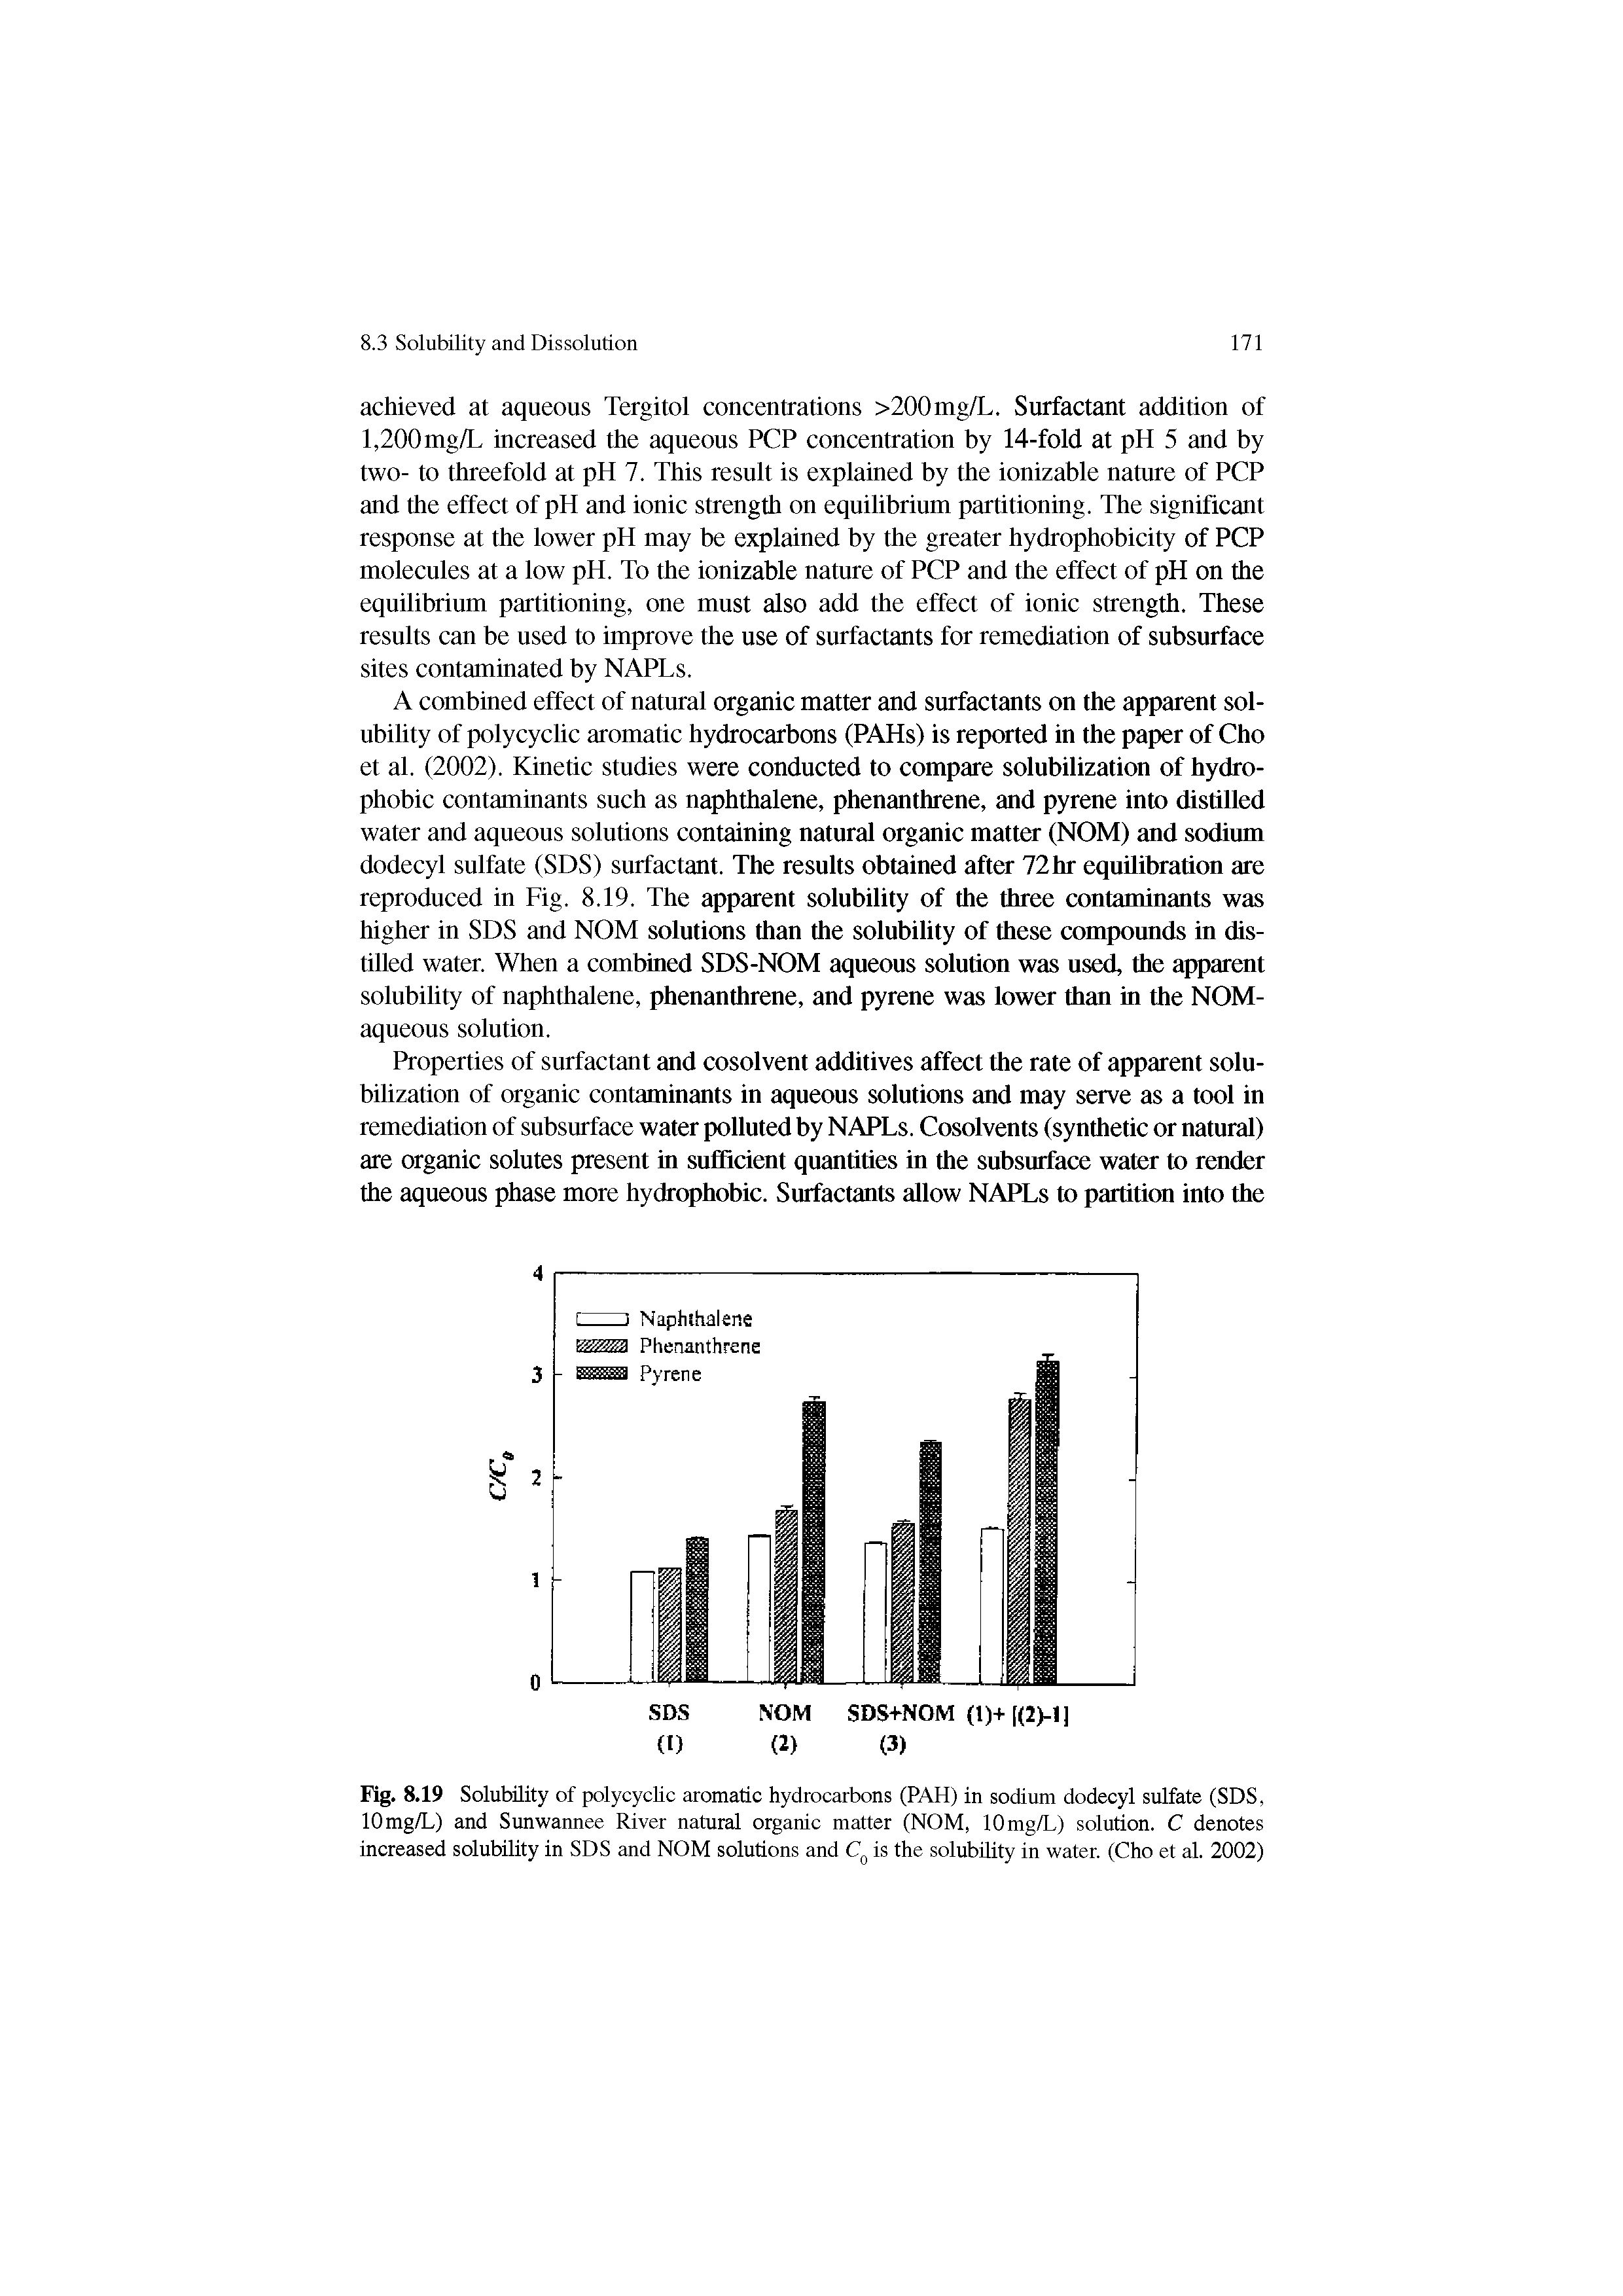 Fig. 8.19 Solubility of polycyclic aromatic hydrocarbons (PAH) in sodium dodecyl sulfate (SDS, lOmg/L) and Sunwannee River natural organic matter (NOM, lOmg/L) solution. C denotes increased solubility in SDS and NOM solutions and is the solubility in water. (Cho et al. 2002)...